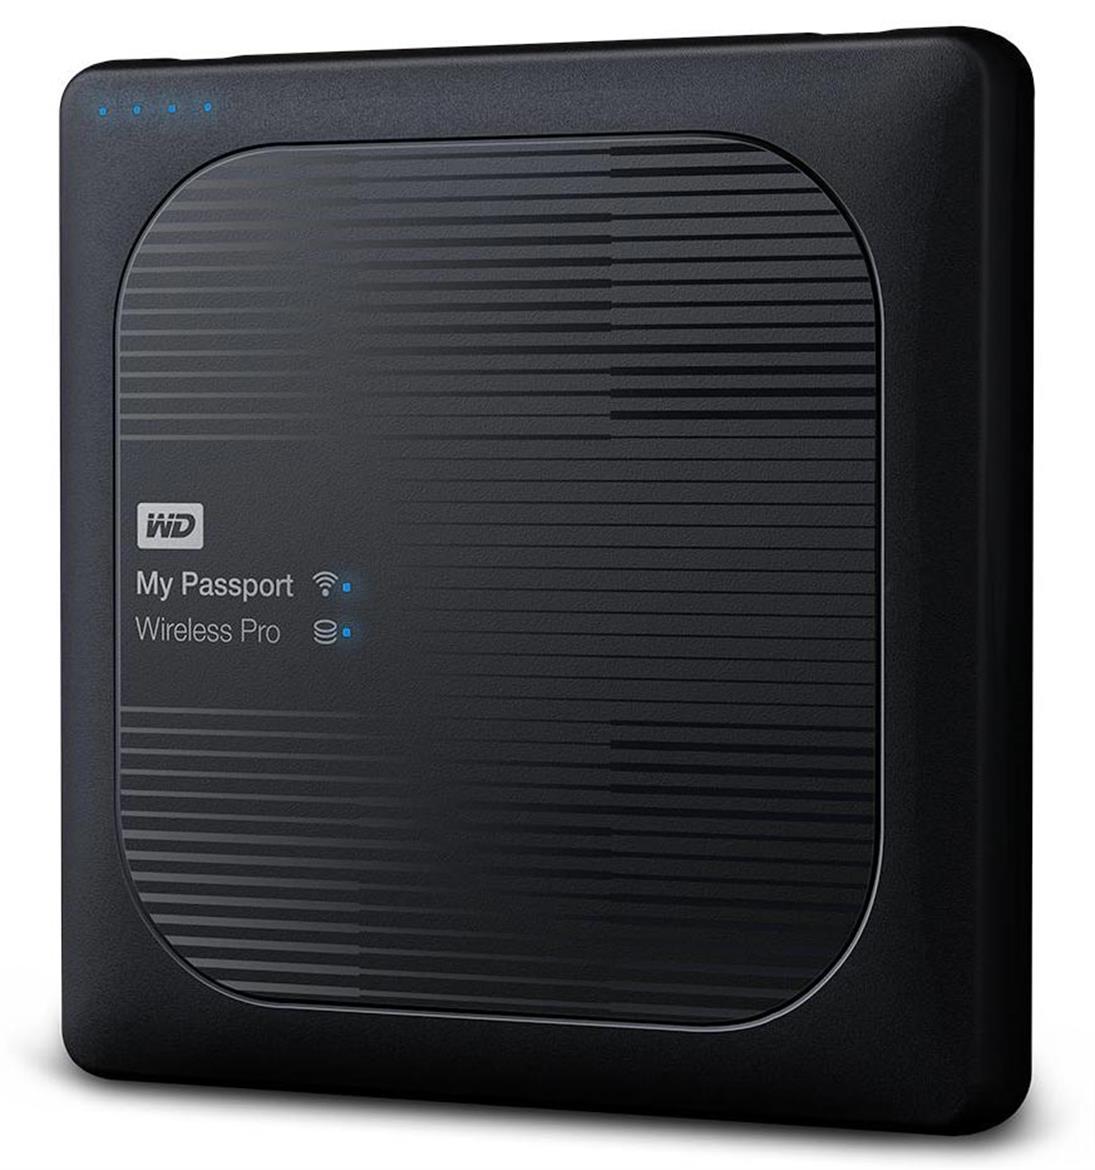 WD My Passport Wireless Pro Review: Portable Storage For Mobile Devices